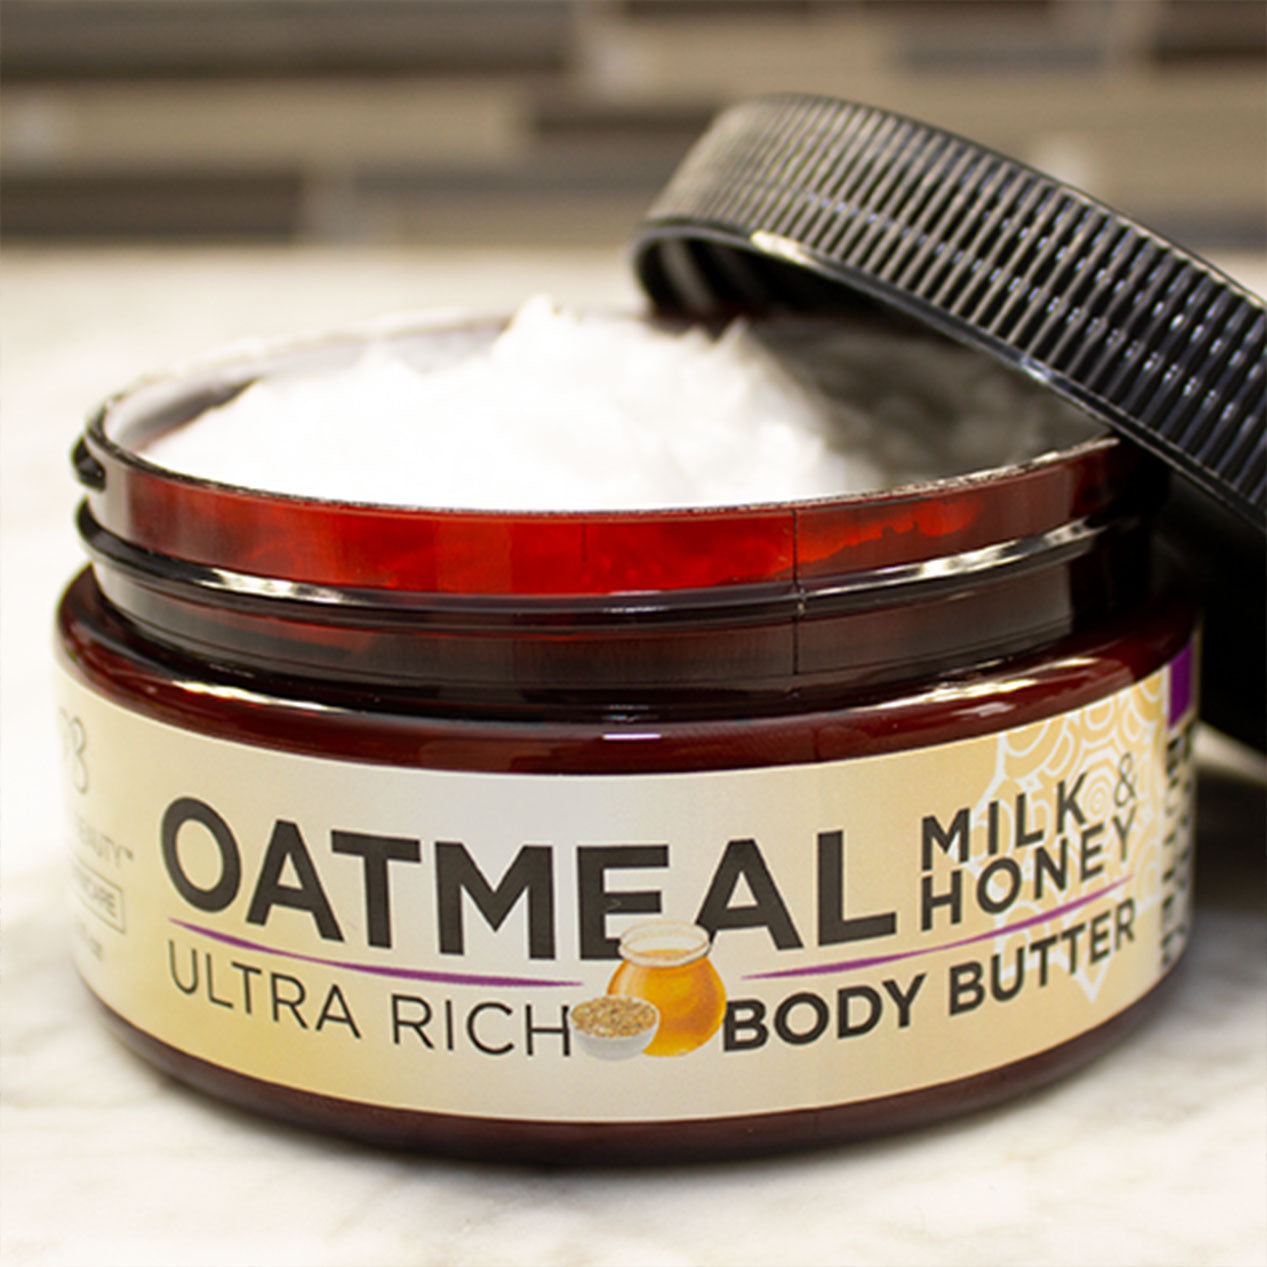 How to Use Body Butters